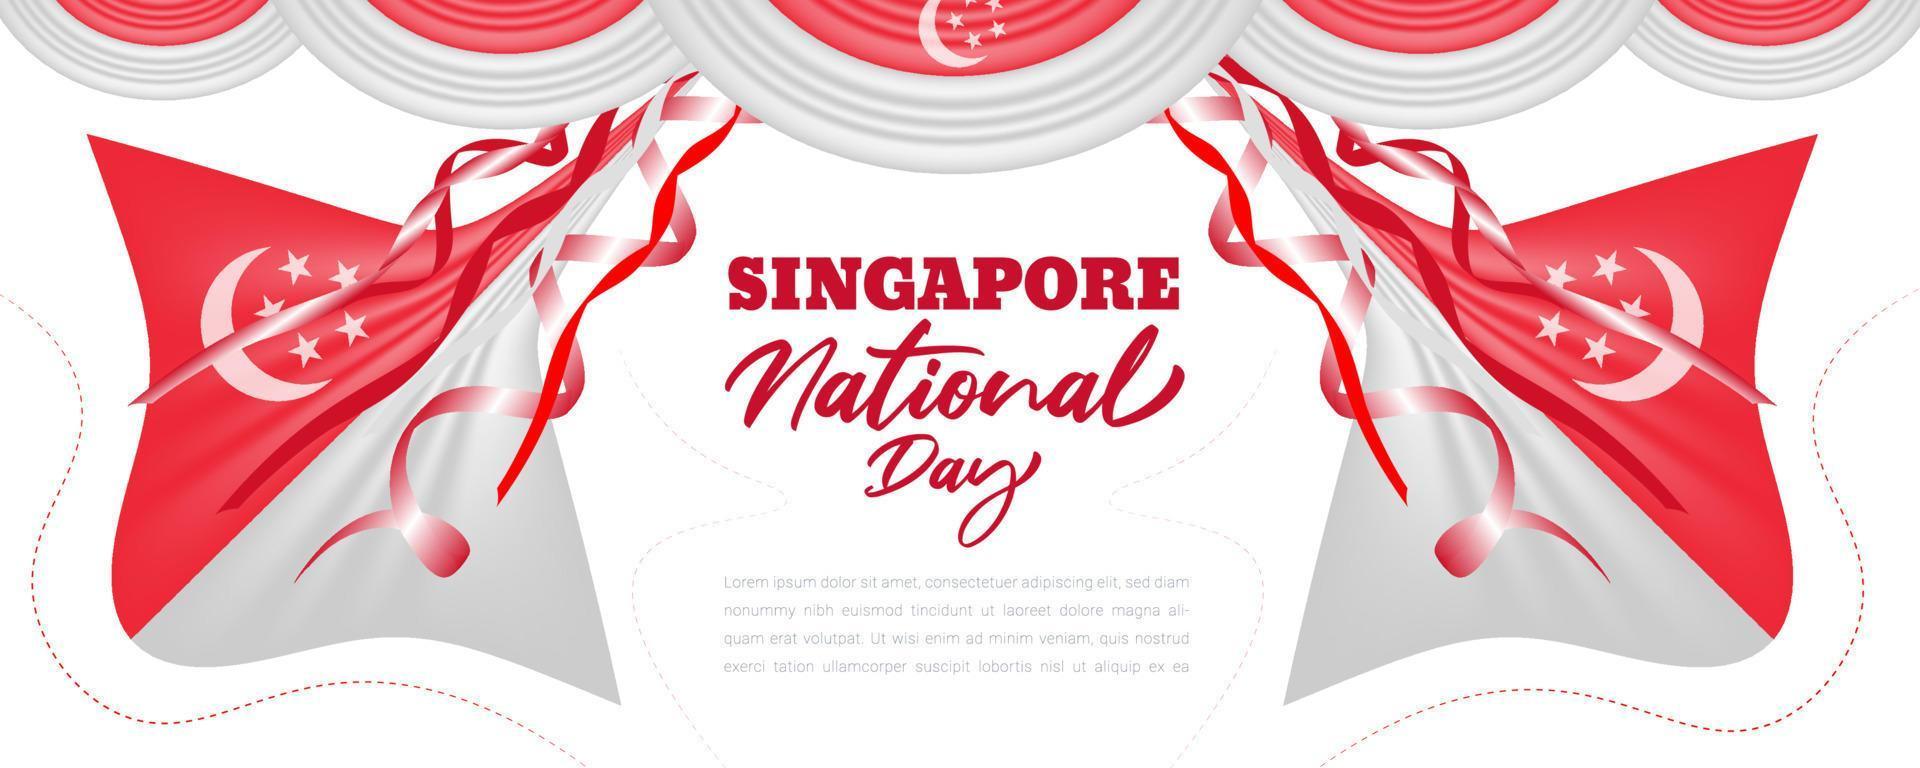 Waving ribbon or flag of Singapore national day background design vector